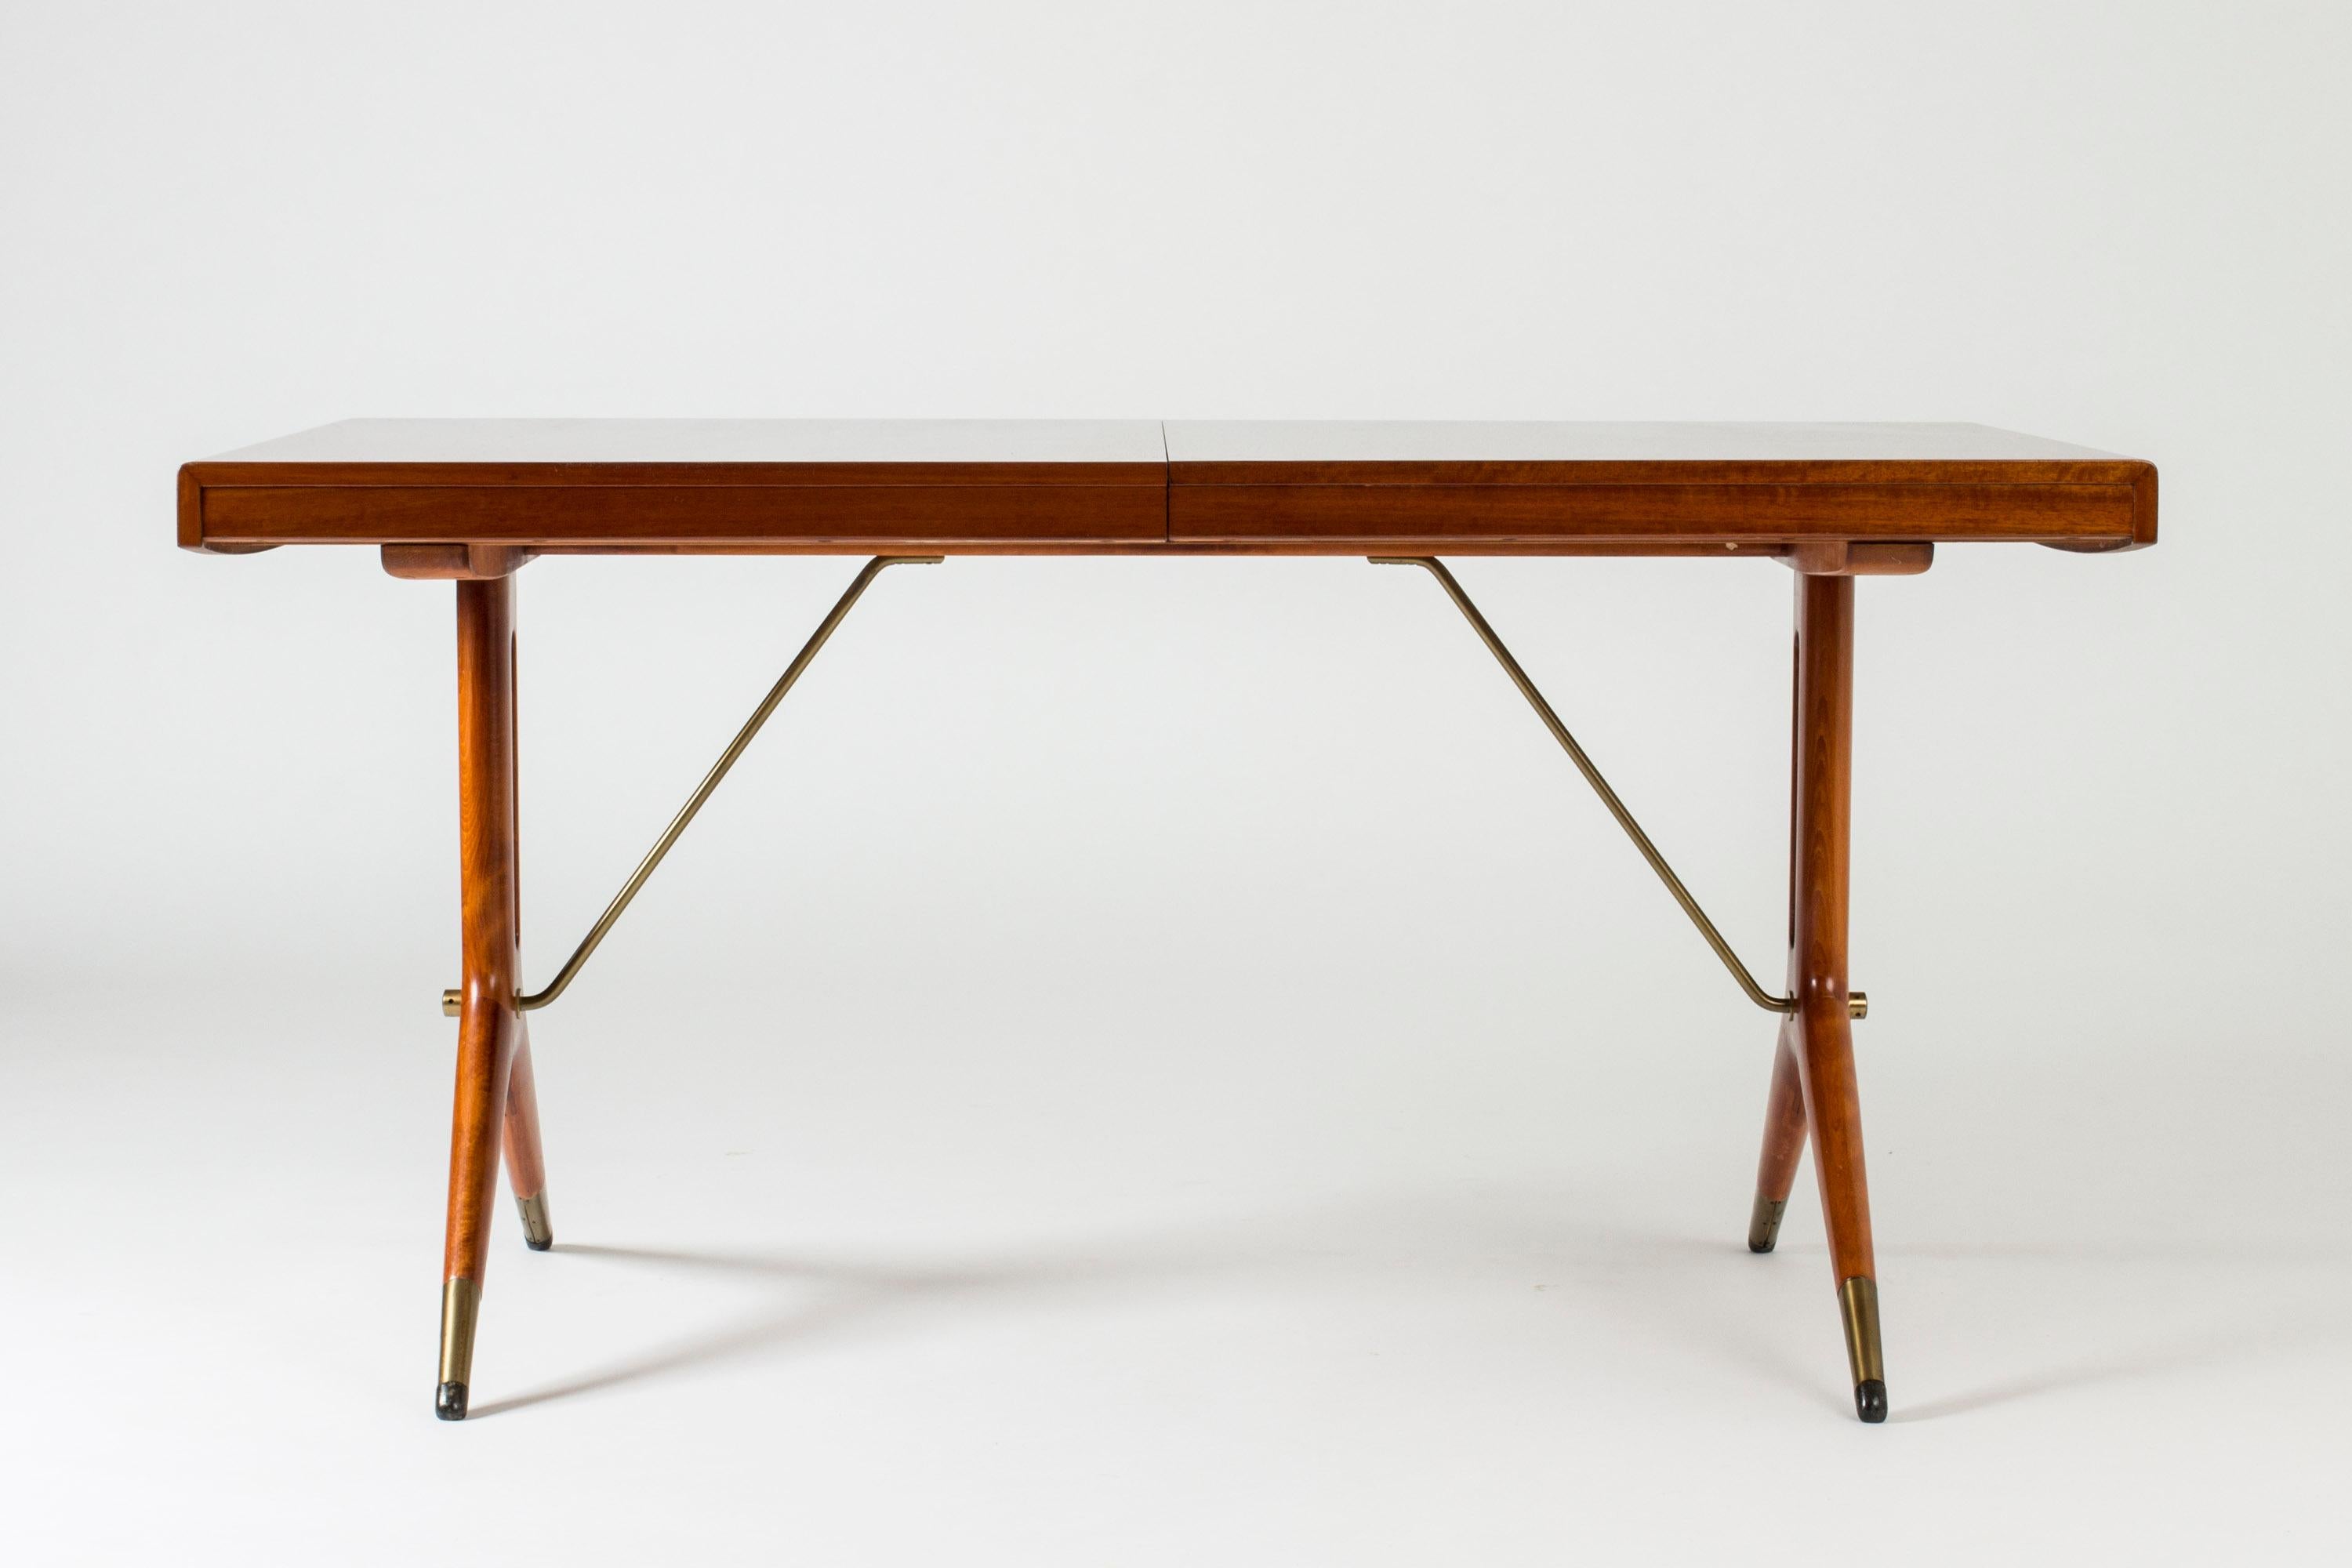 Beautiful “Napoli” dining table by David Rosén. Mahogany tabletop and elegantly sculpted legs with brass details. Two extra leaves make this a versatile table that looks great in all lengths.

The length of the table without extensions is 147 cm,